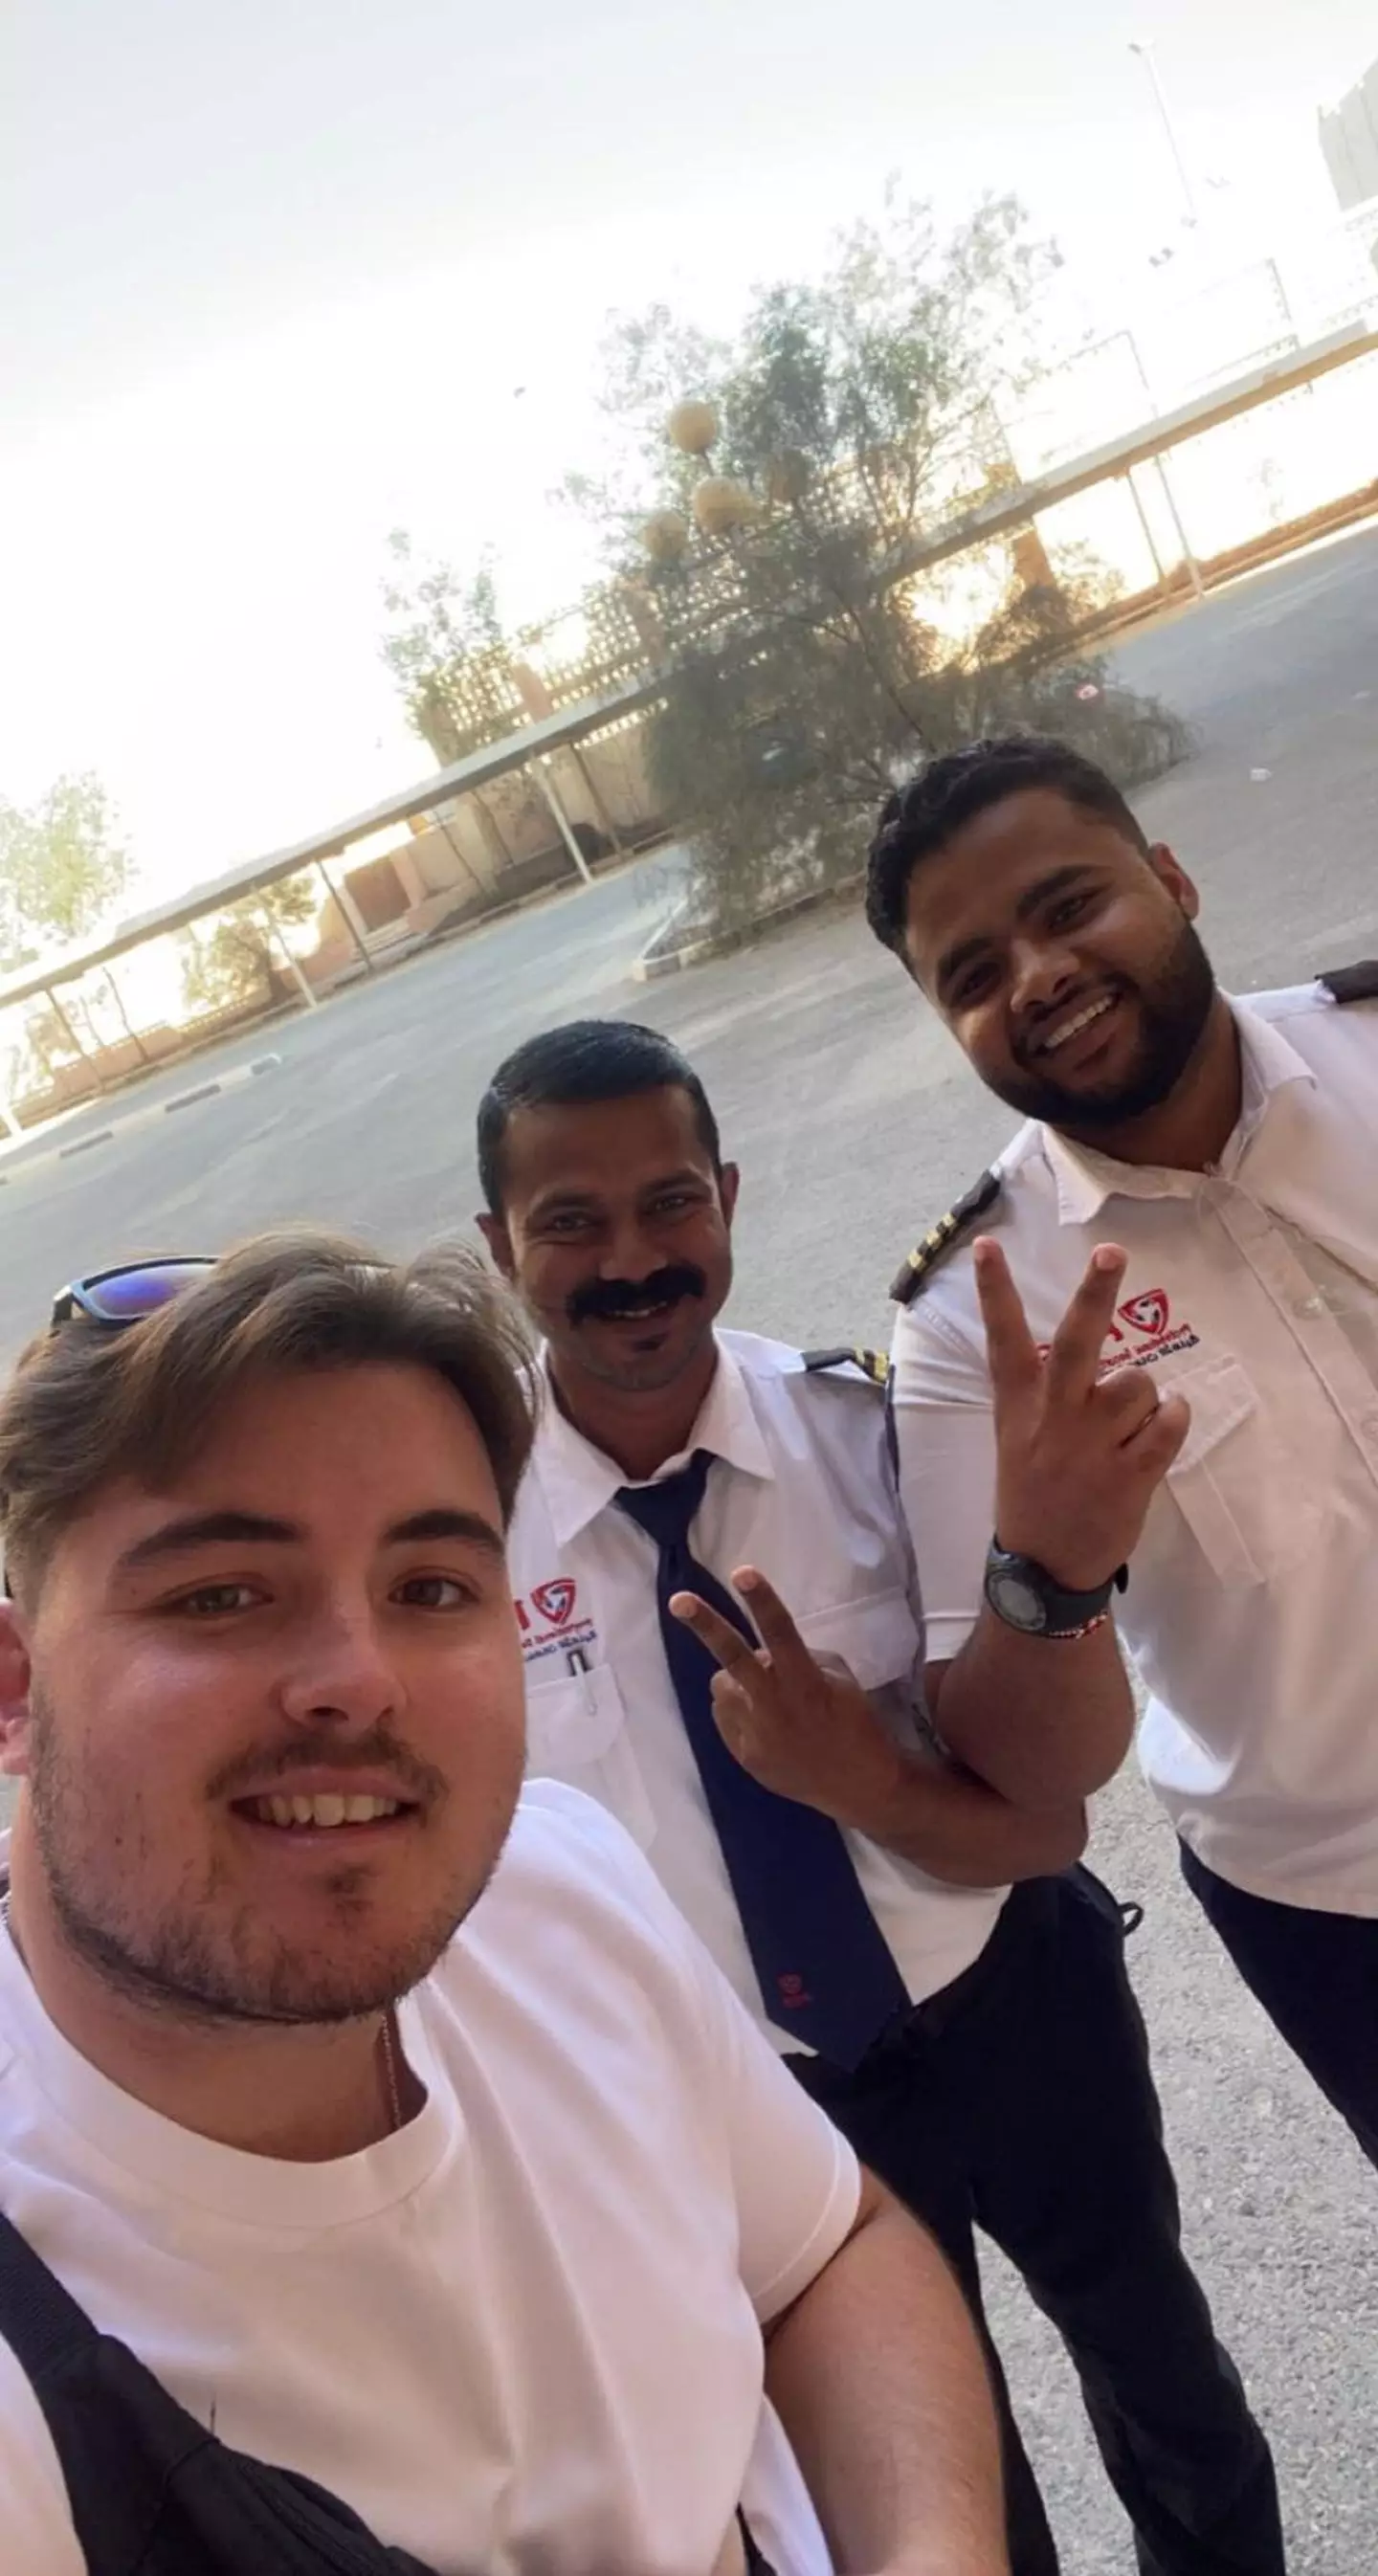 Rob with Sadiq the security guard and his colleague.